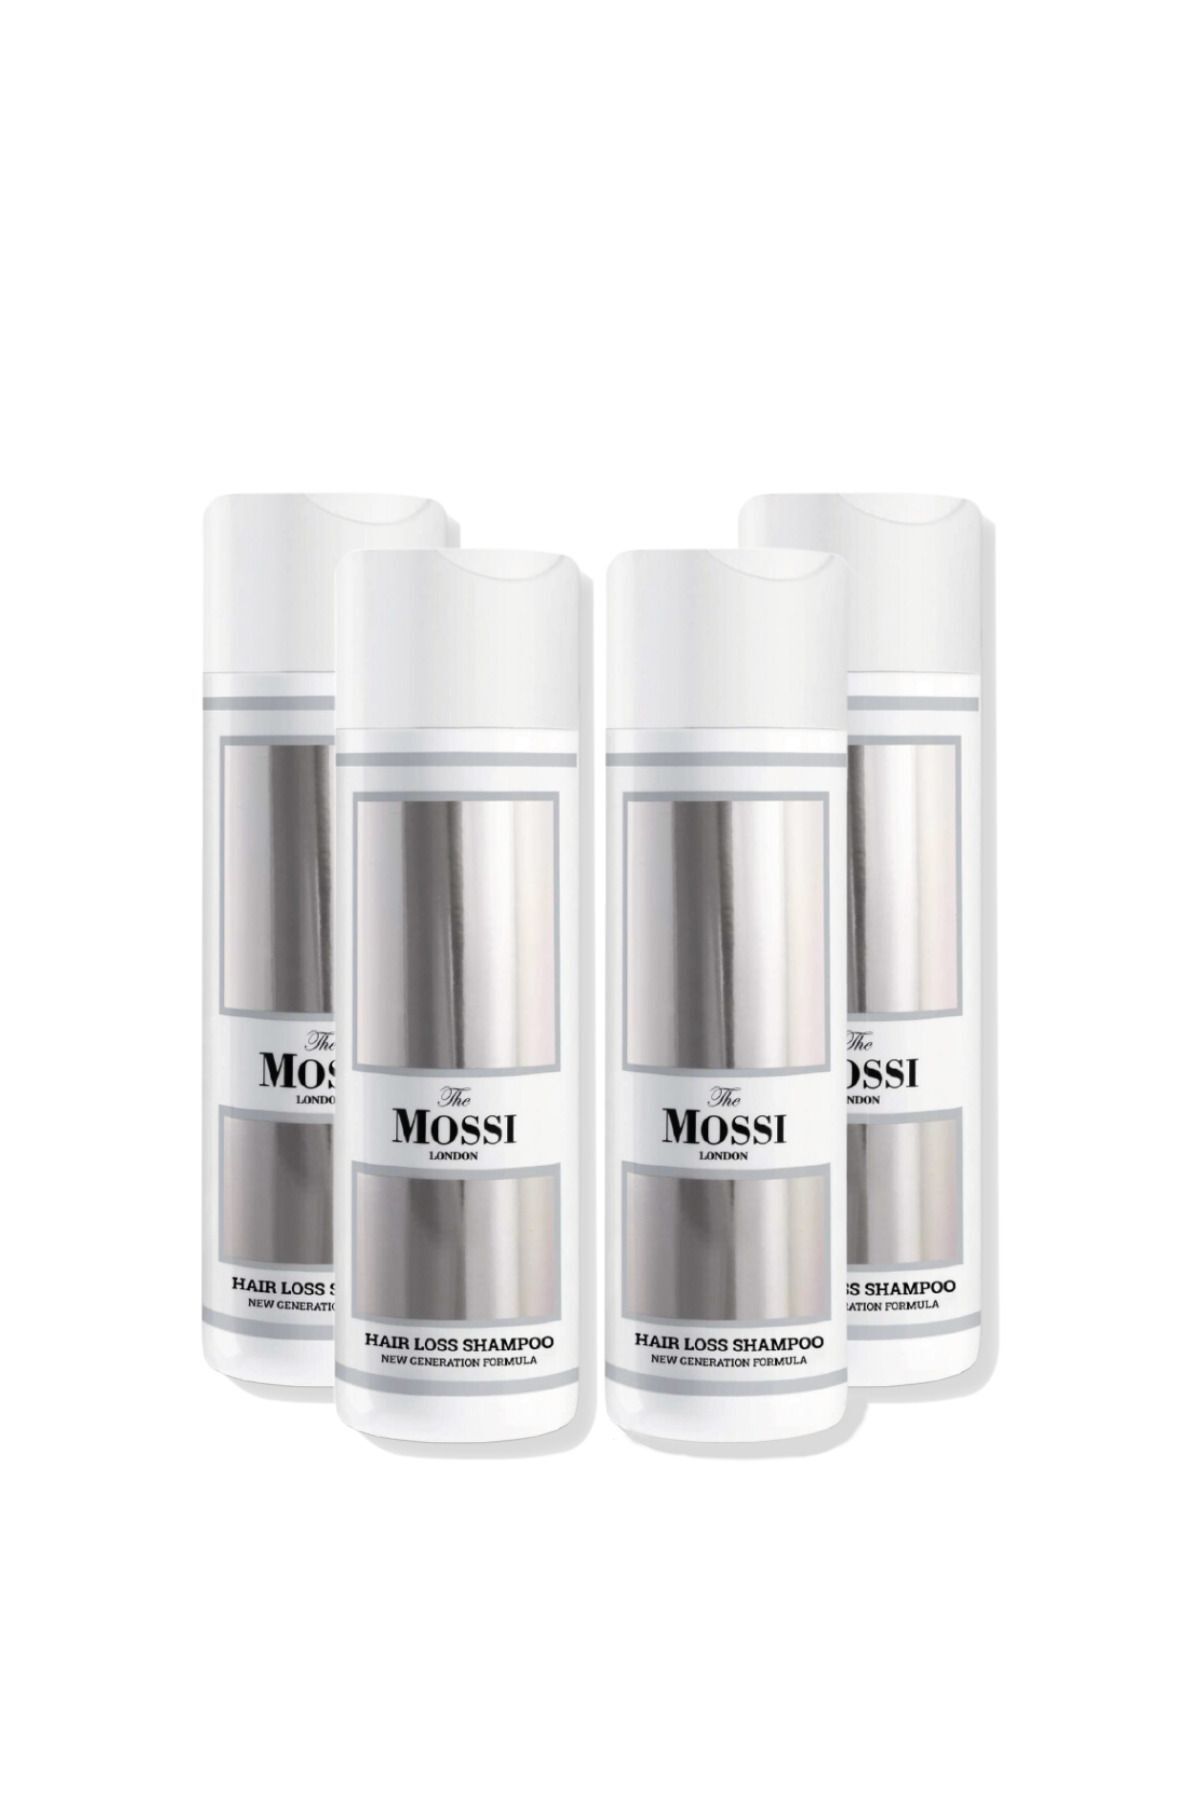 The Mossi London Hair Loss Shampoo Four Pack